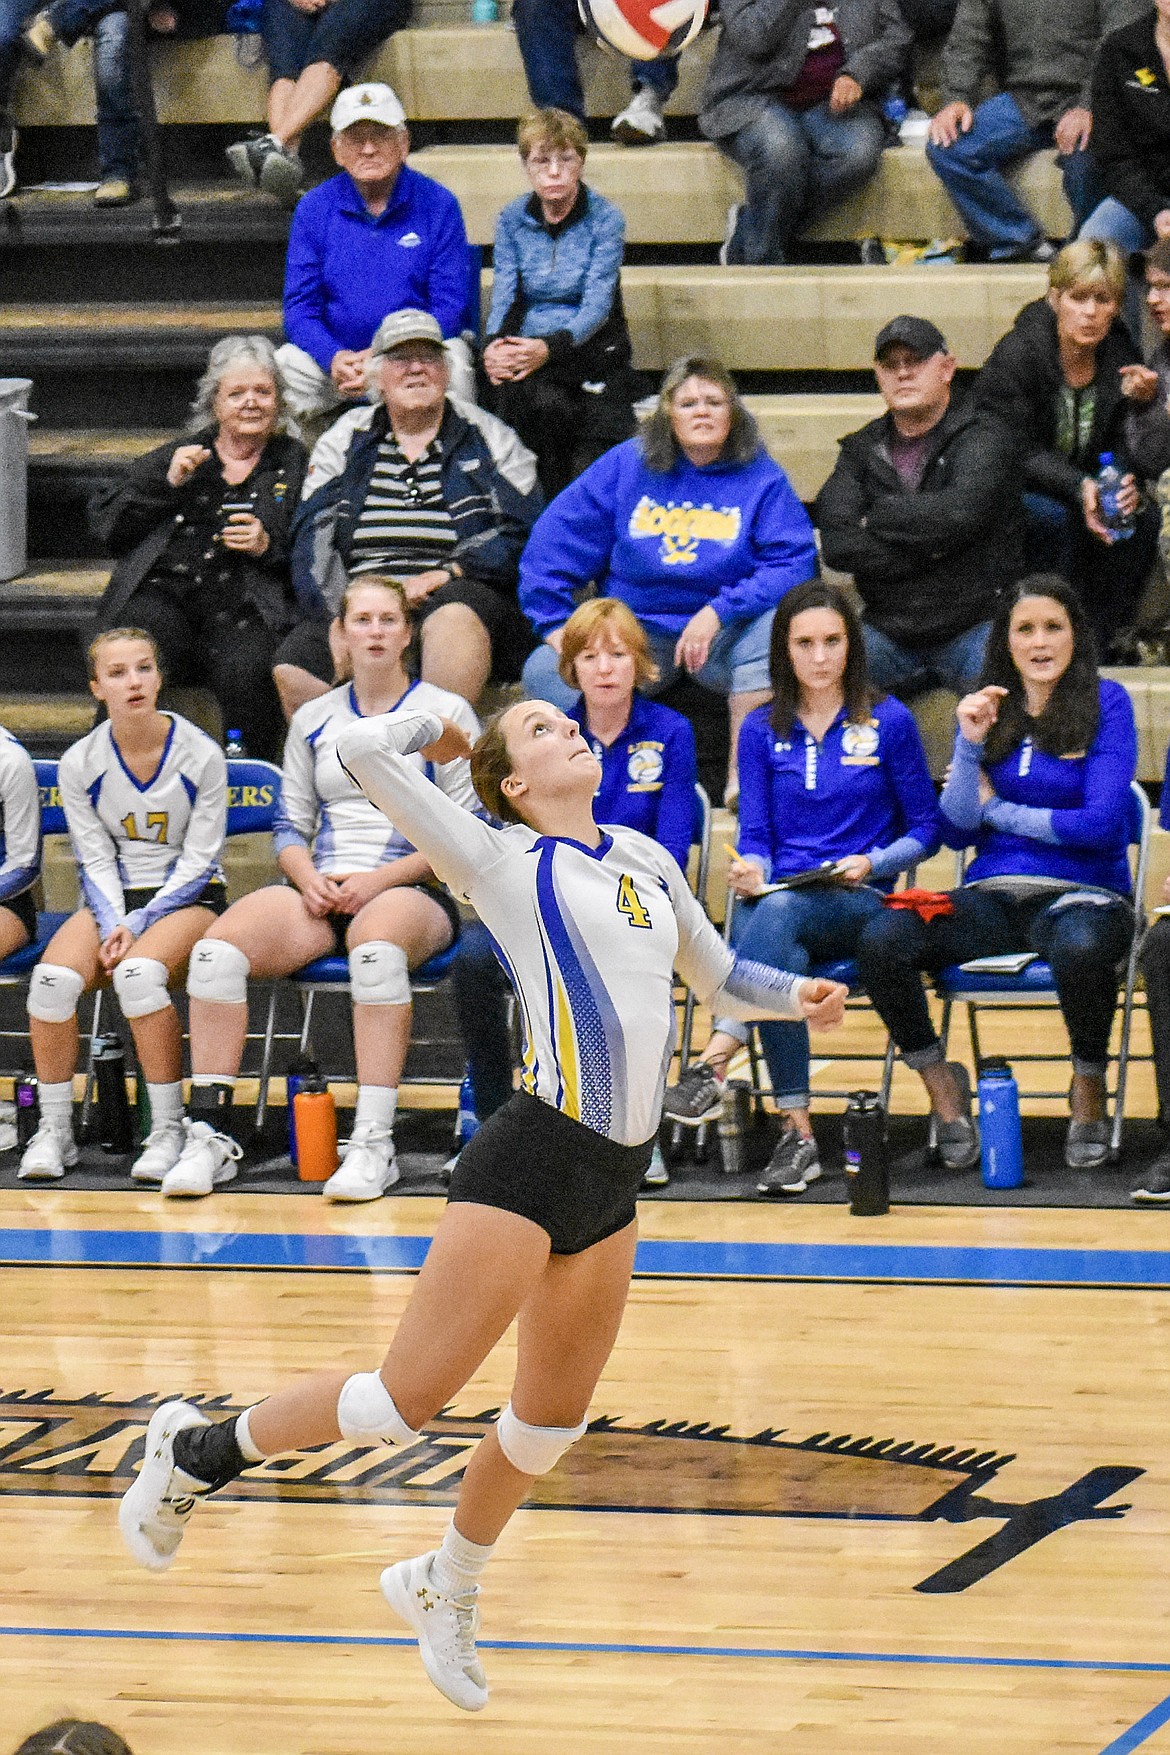 Libby senior Jayden Winslow goes up for a dig during the Lady Loggers&#146; third set of a three-set win against Ronan Saturday. (Ben Kibbey/The Western News)